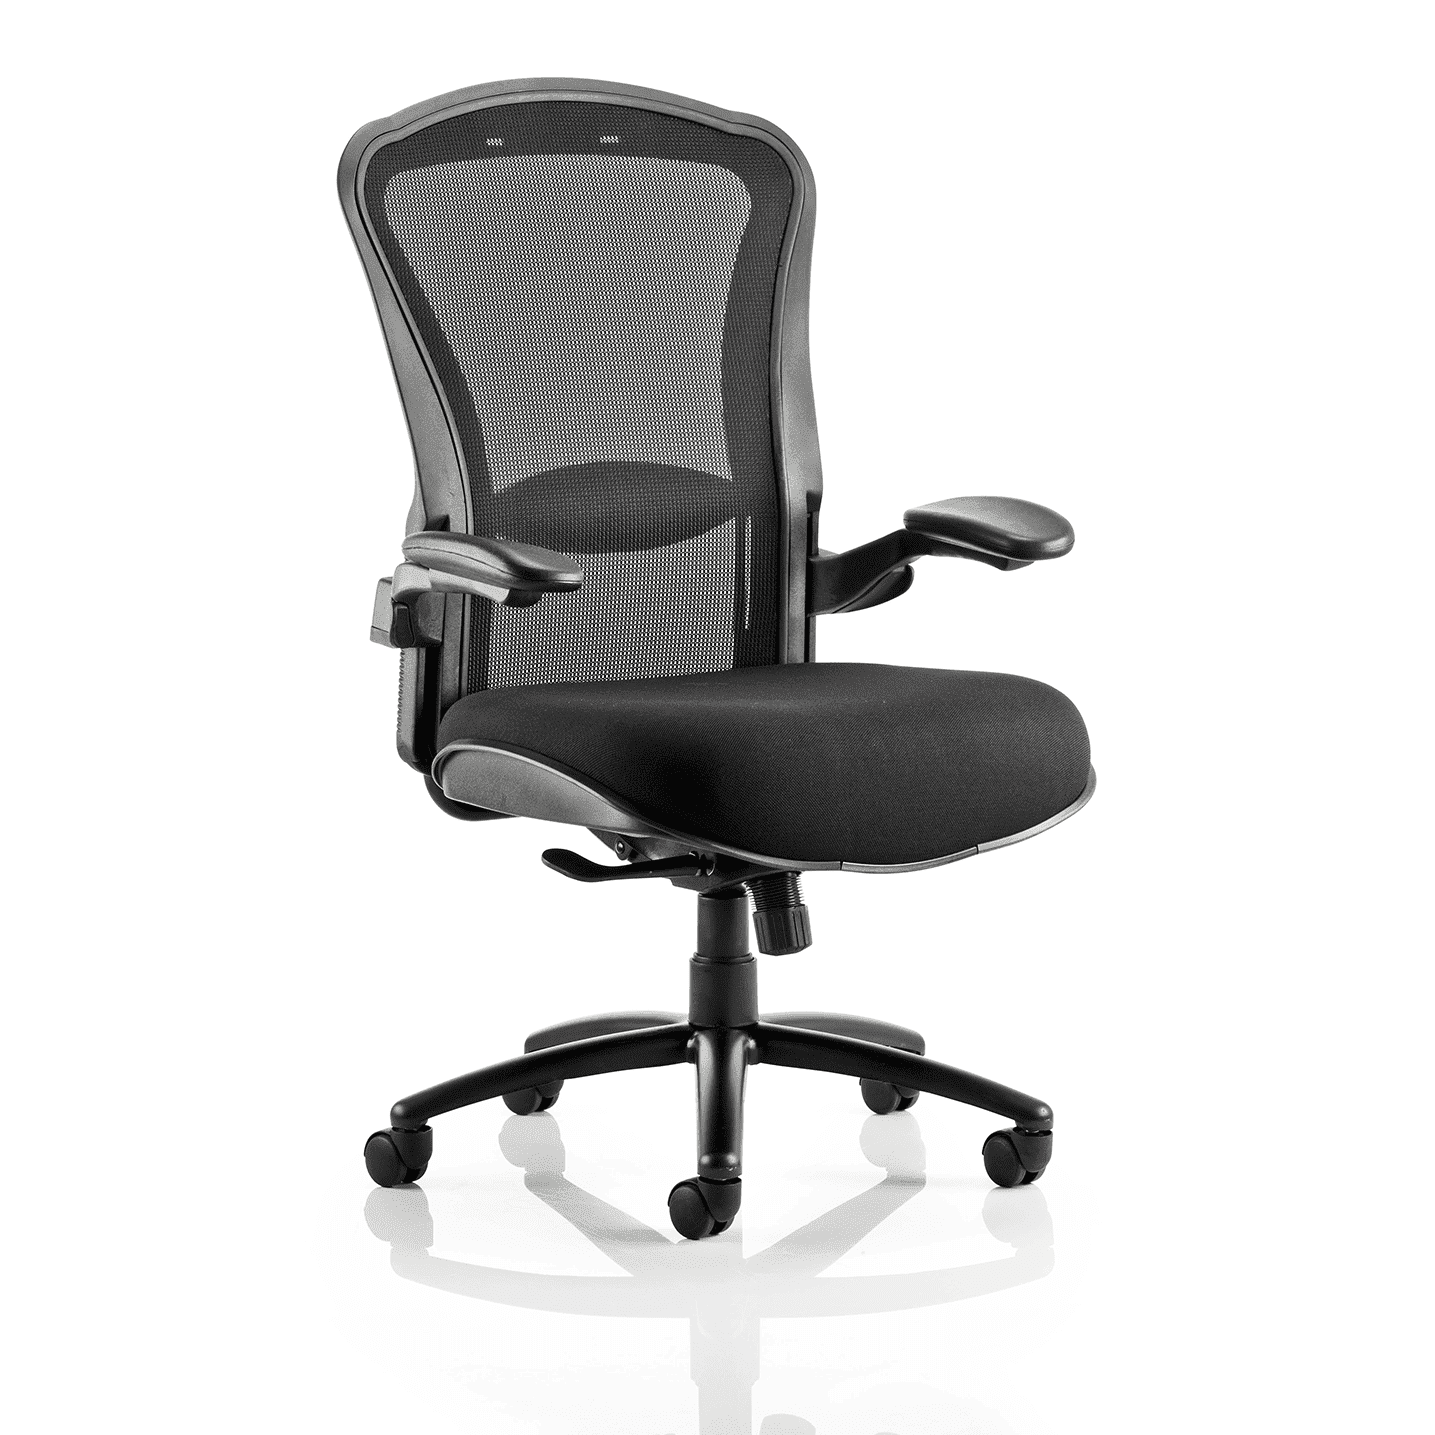 Houston High Mesh Back Heavy Duty Task Operator Office Chair with Arms - 24hr Usage, 205kg Capacity, Adjustable Lumbar Support, Synchro Tilt